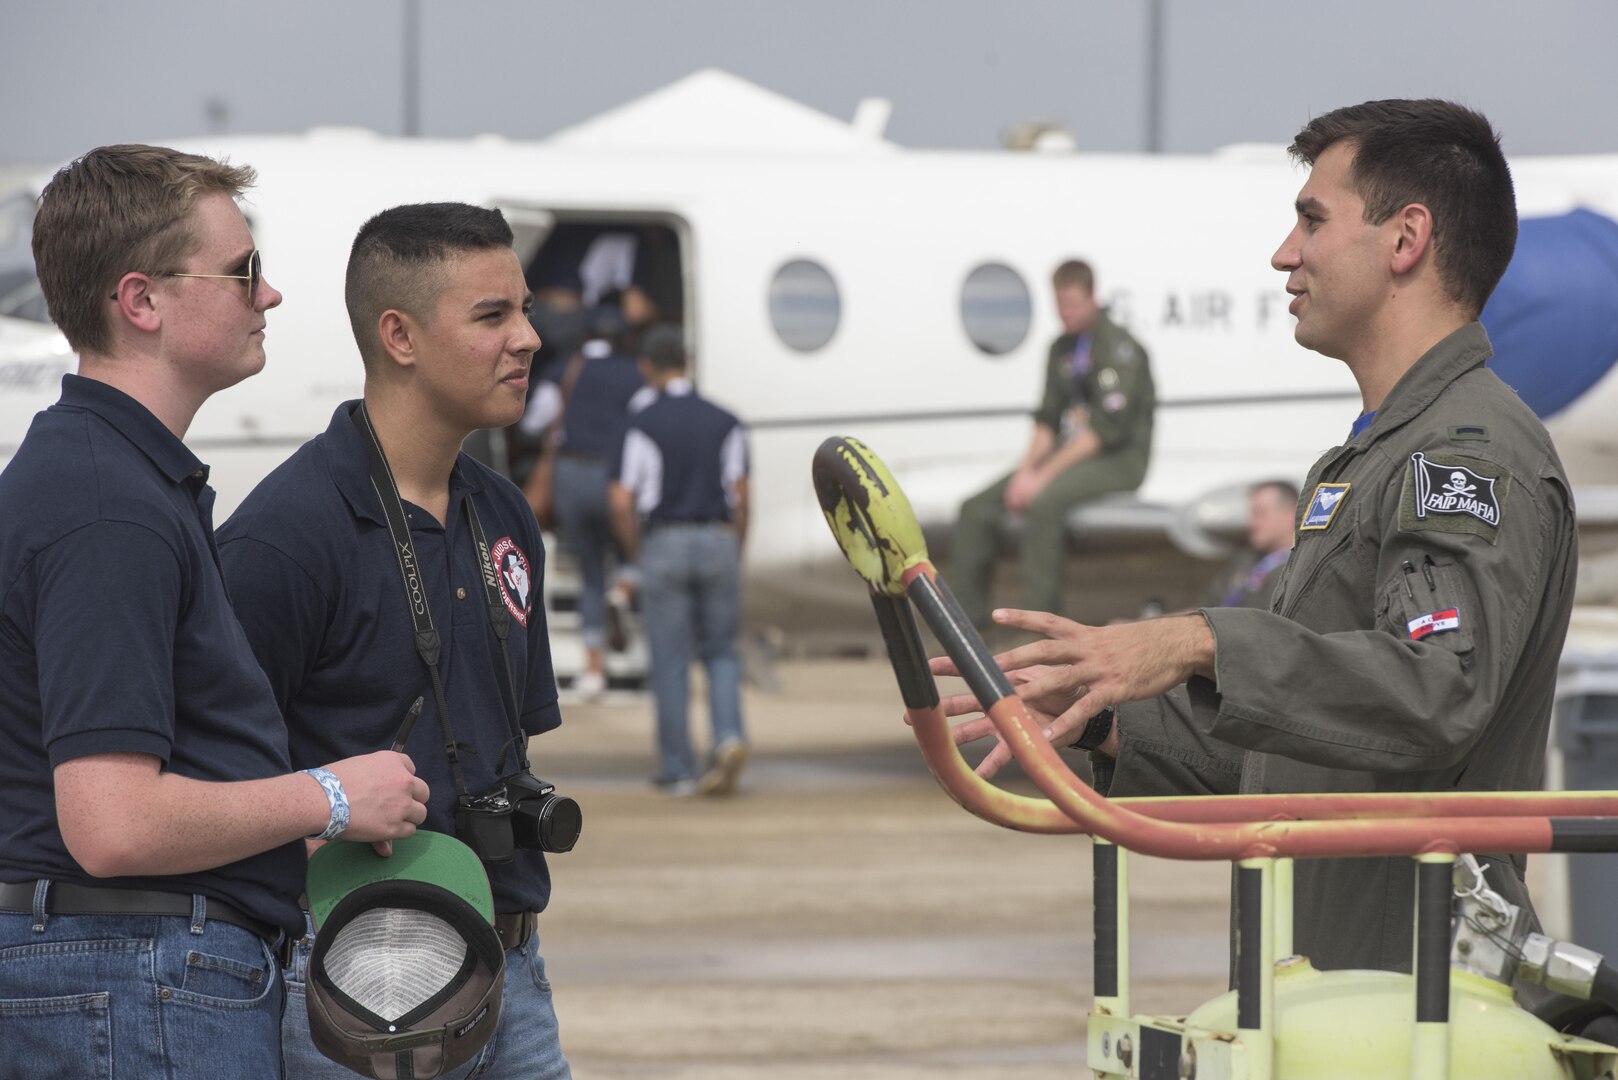 Junior Reserve Officers’ Corps cadets speak to a pilot from the 12th Flying Training Wing Nov. 3, 2017, during the 2017 Joint Base San Antonio Air Show and Open House at JBSA-Lackland, Kelly Field, Texas. The Junior Reserve Officer Training Corps is a federal program sponsored by the United States Armed Forces in high schools and also in some middle schools across the United States and United States military bases across the world. (U.S. Air Force photo by Senior Airman Stormy Archer)